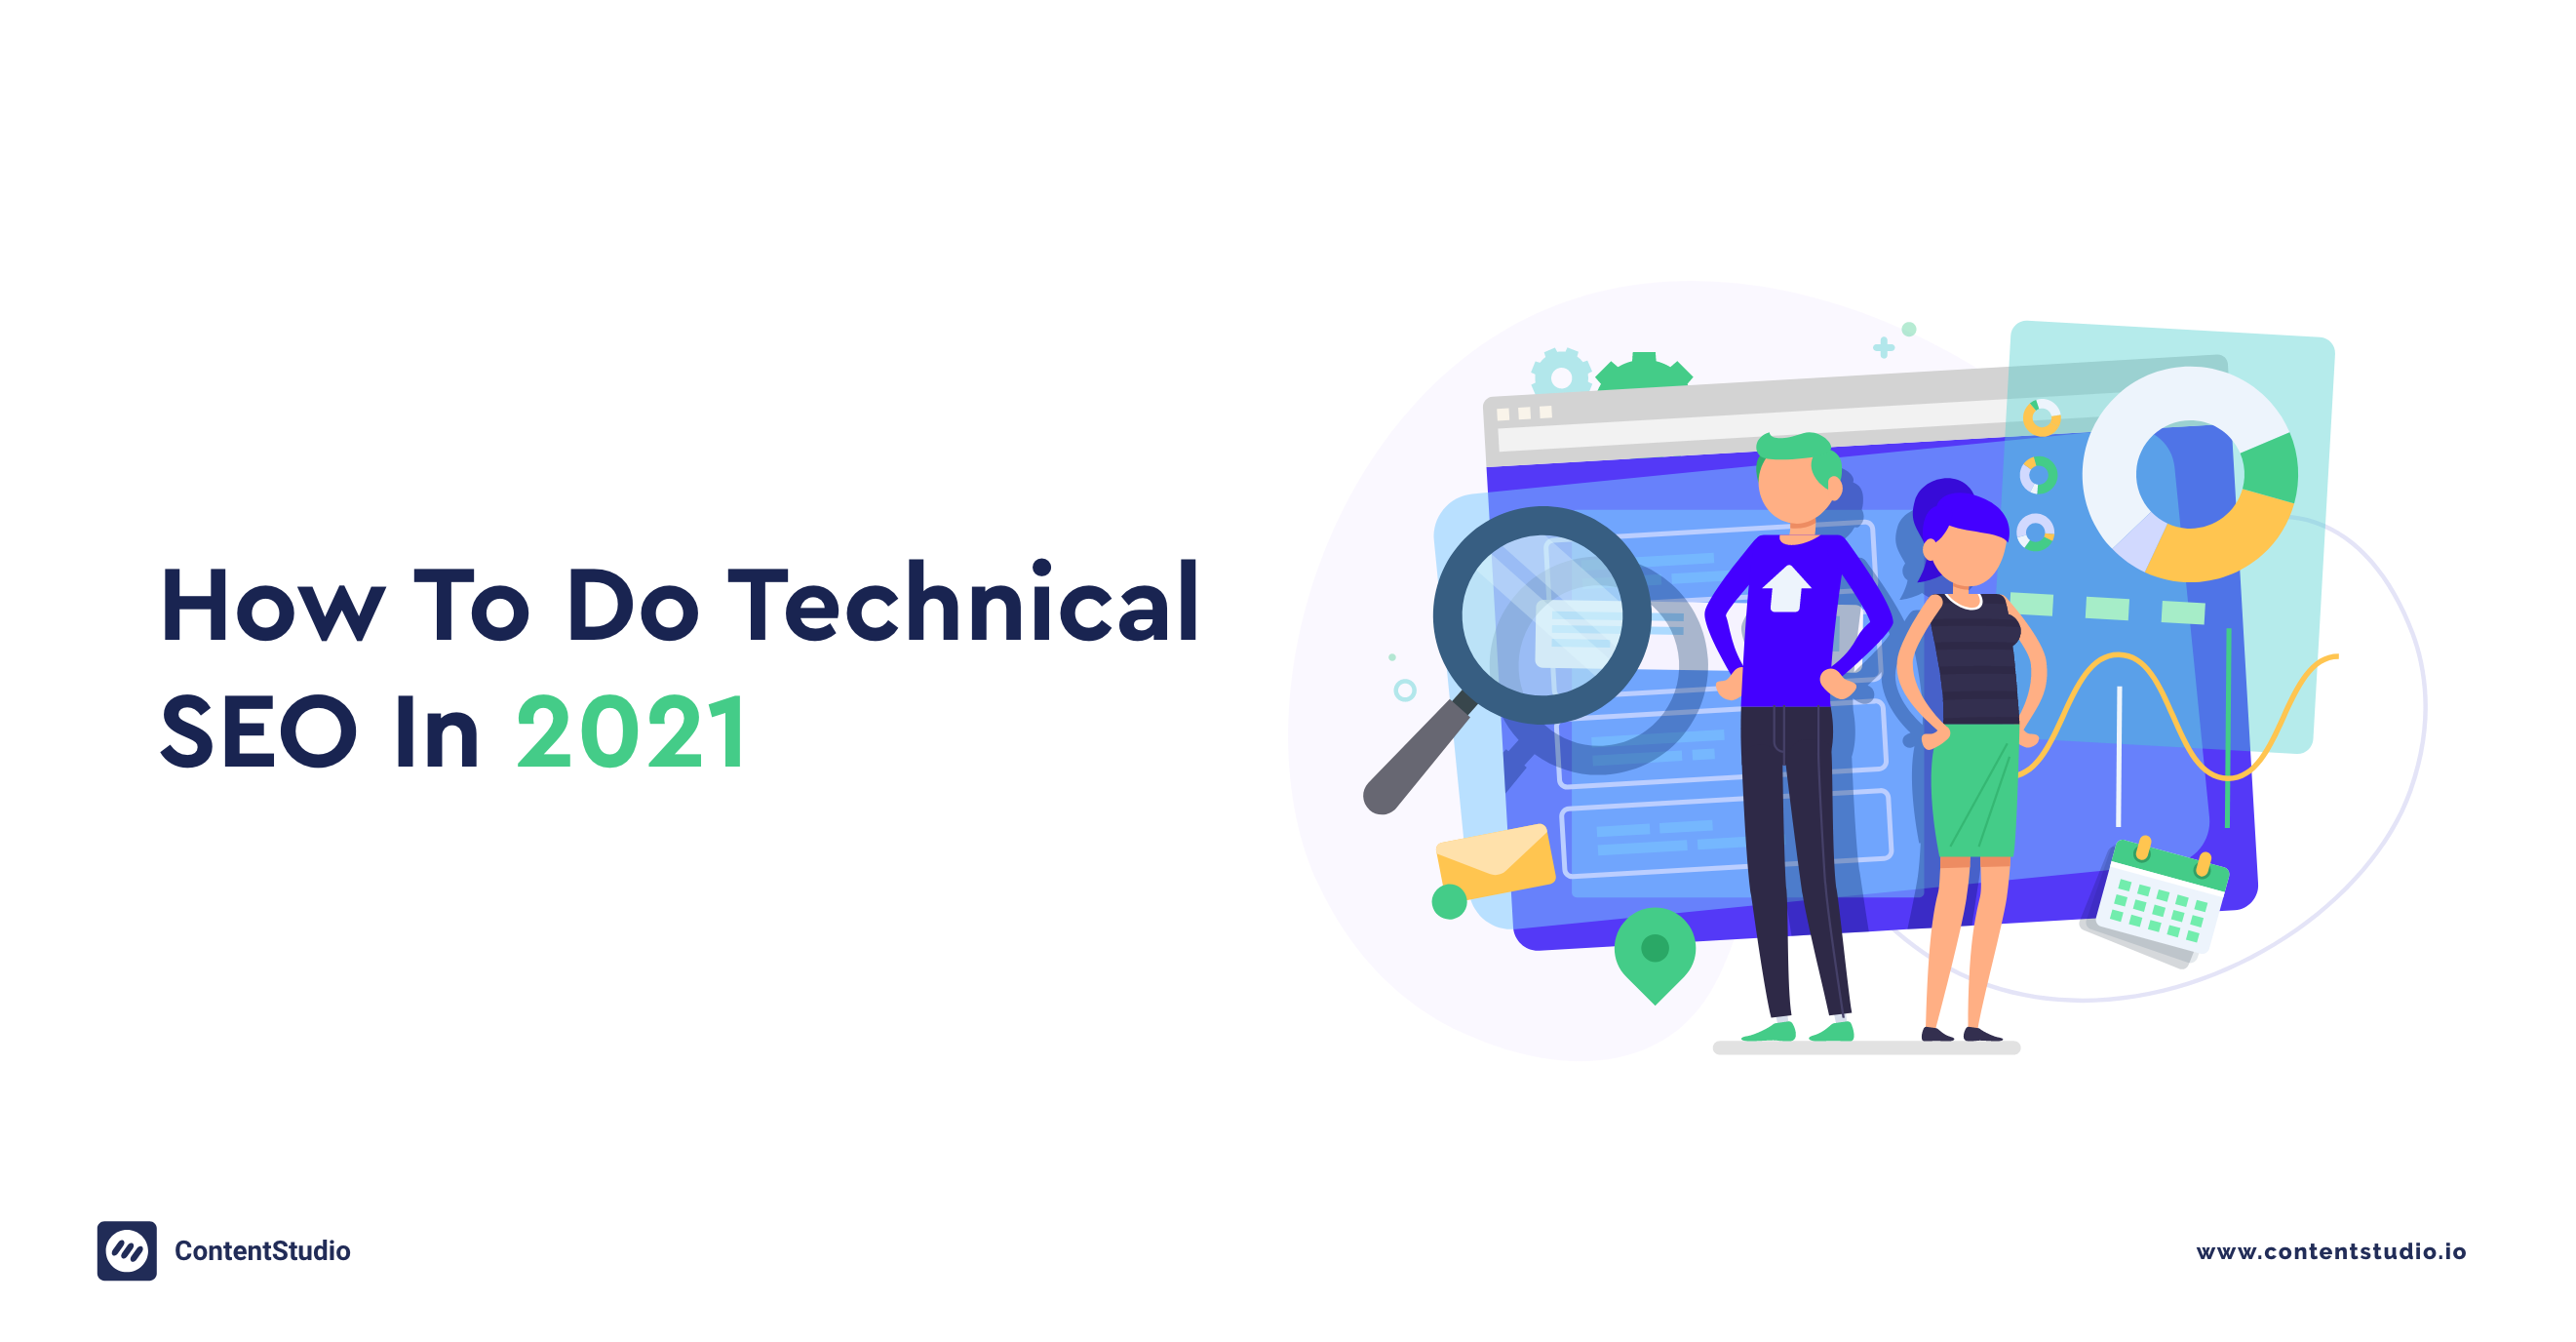 How to do technical SEO in 2021